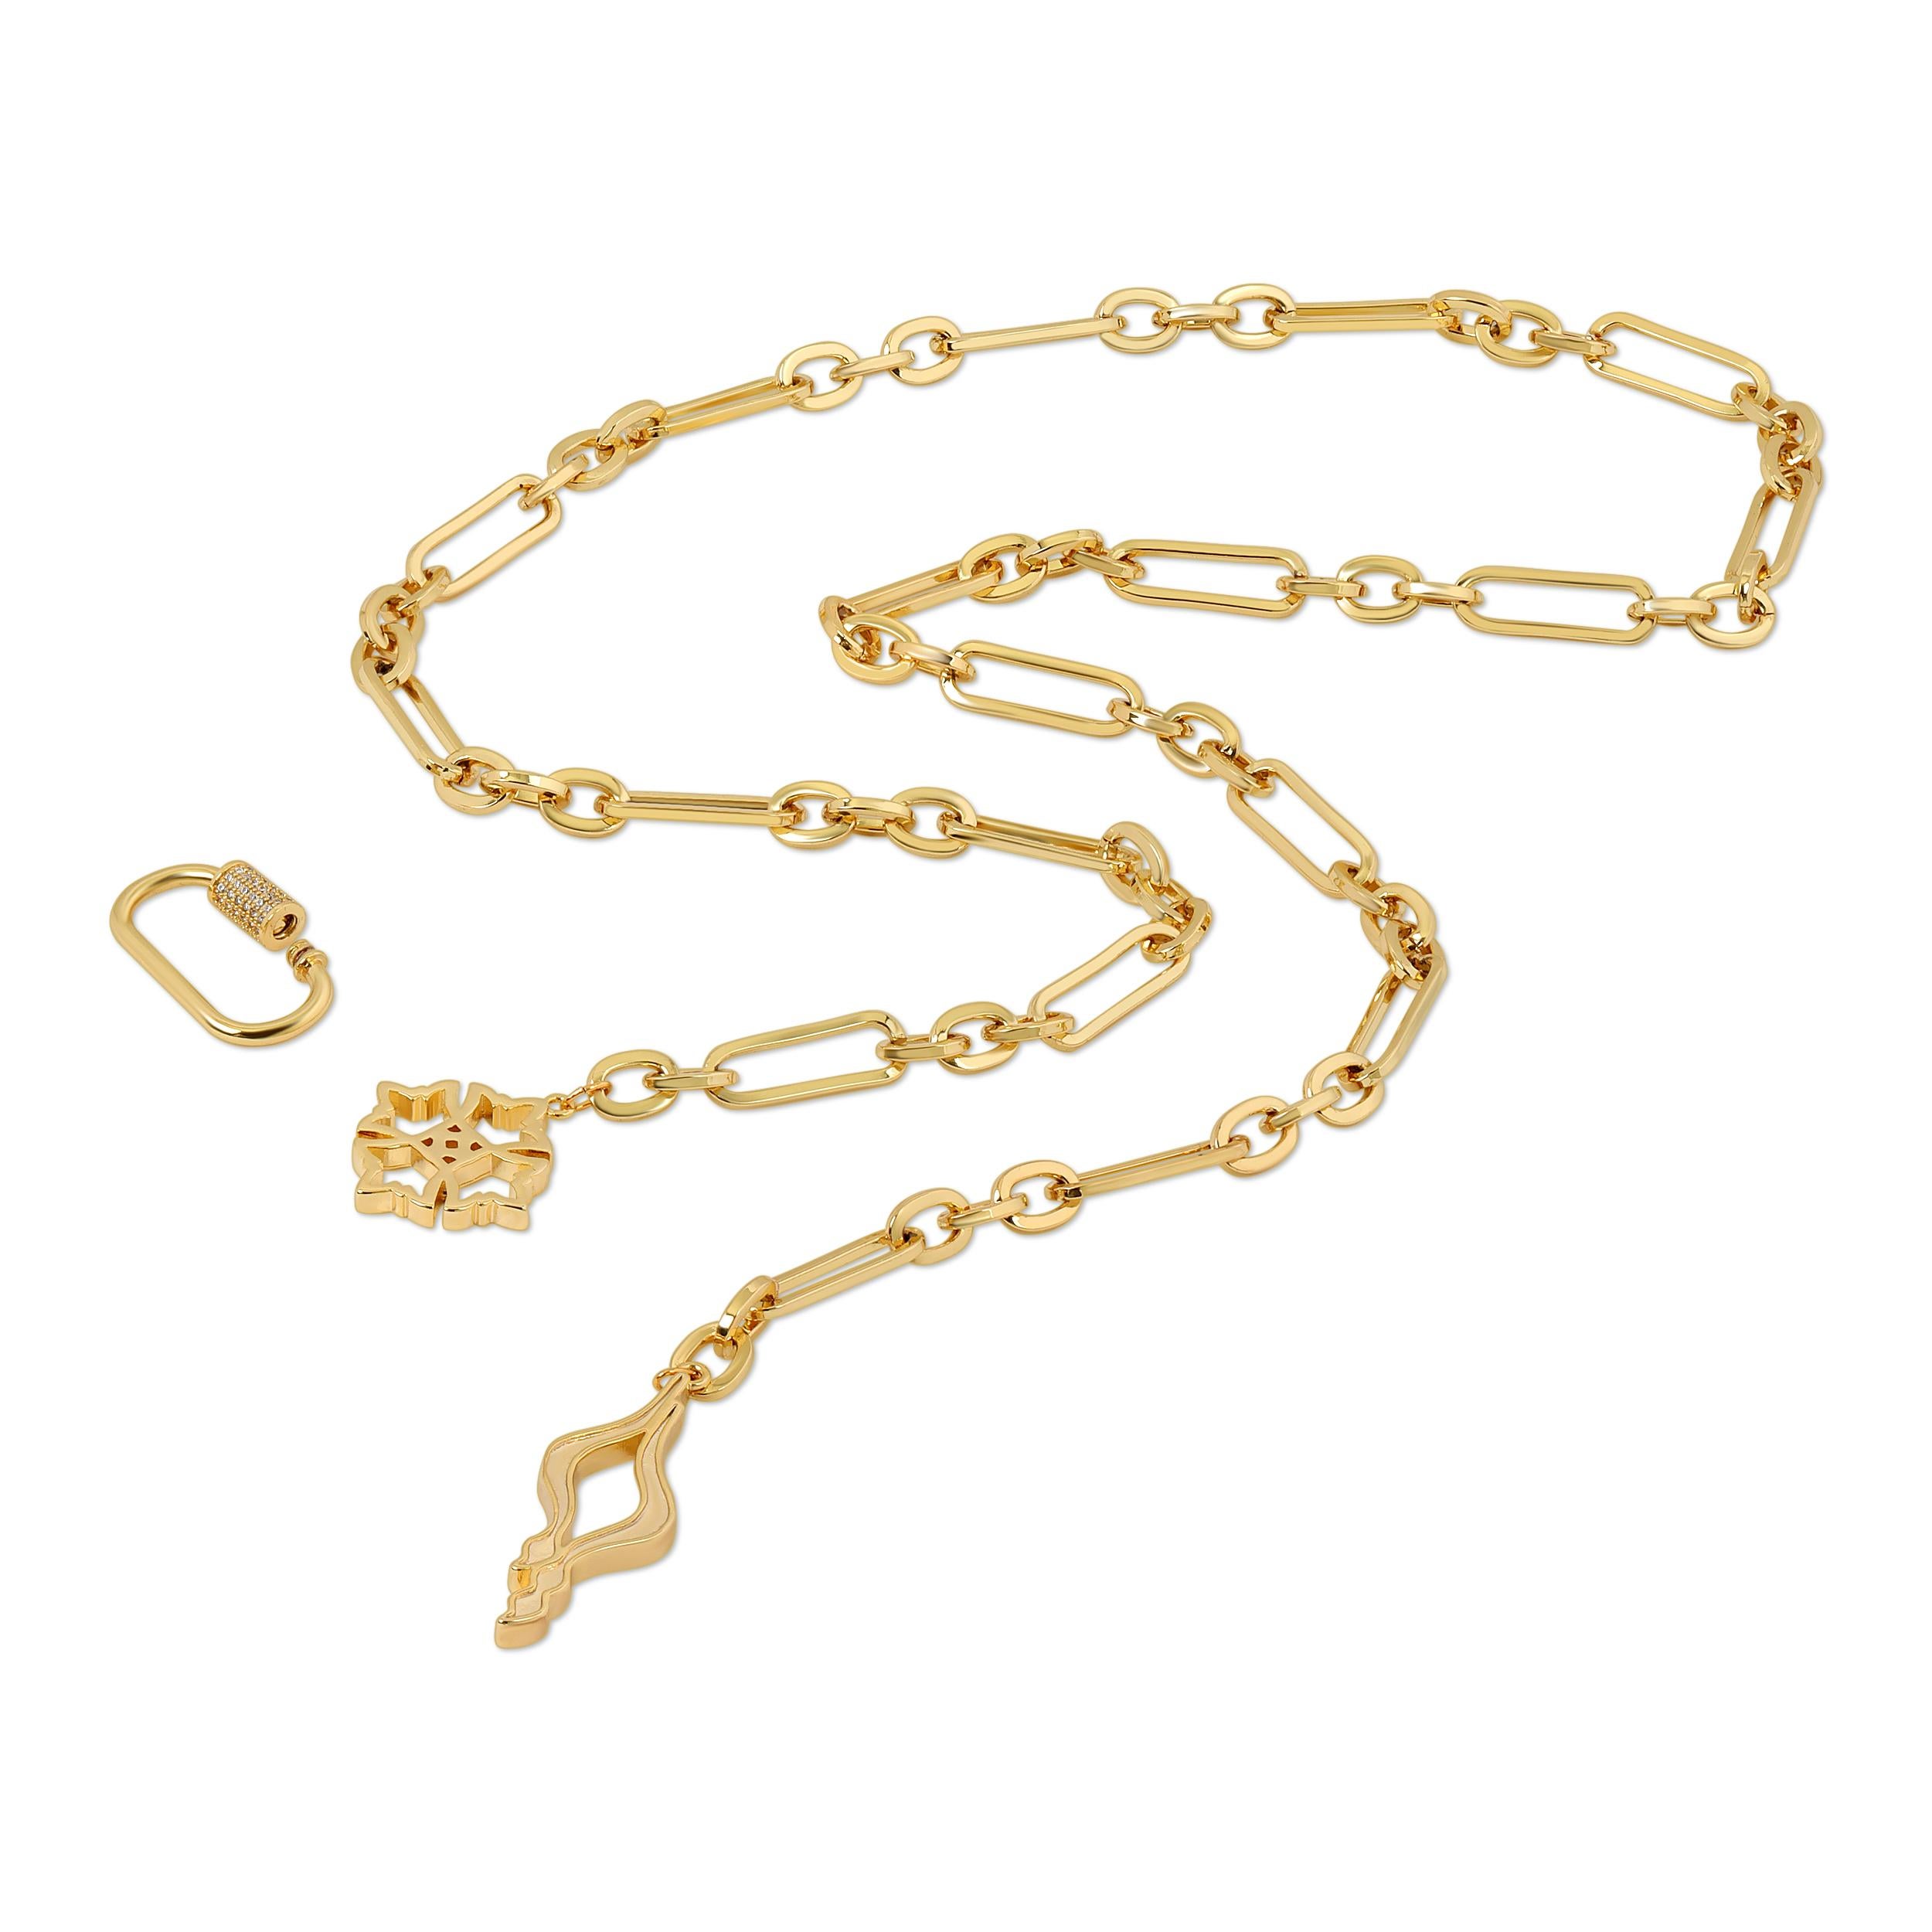 Introducing the Sarva Multi way chain- a versatile and stylish accessory that can be worn in multiple ways! With a detachable lock, you can adjust the size to wear it as a necklace, belt, or bracelet. Double up the chain for a layered look, or wear